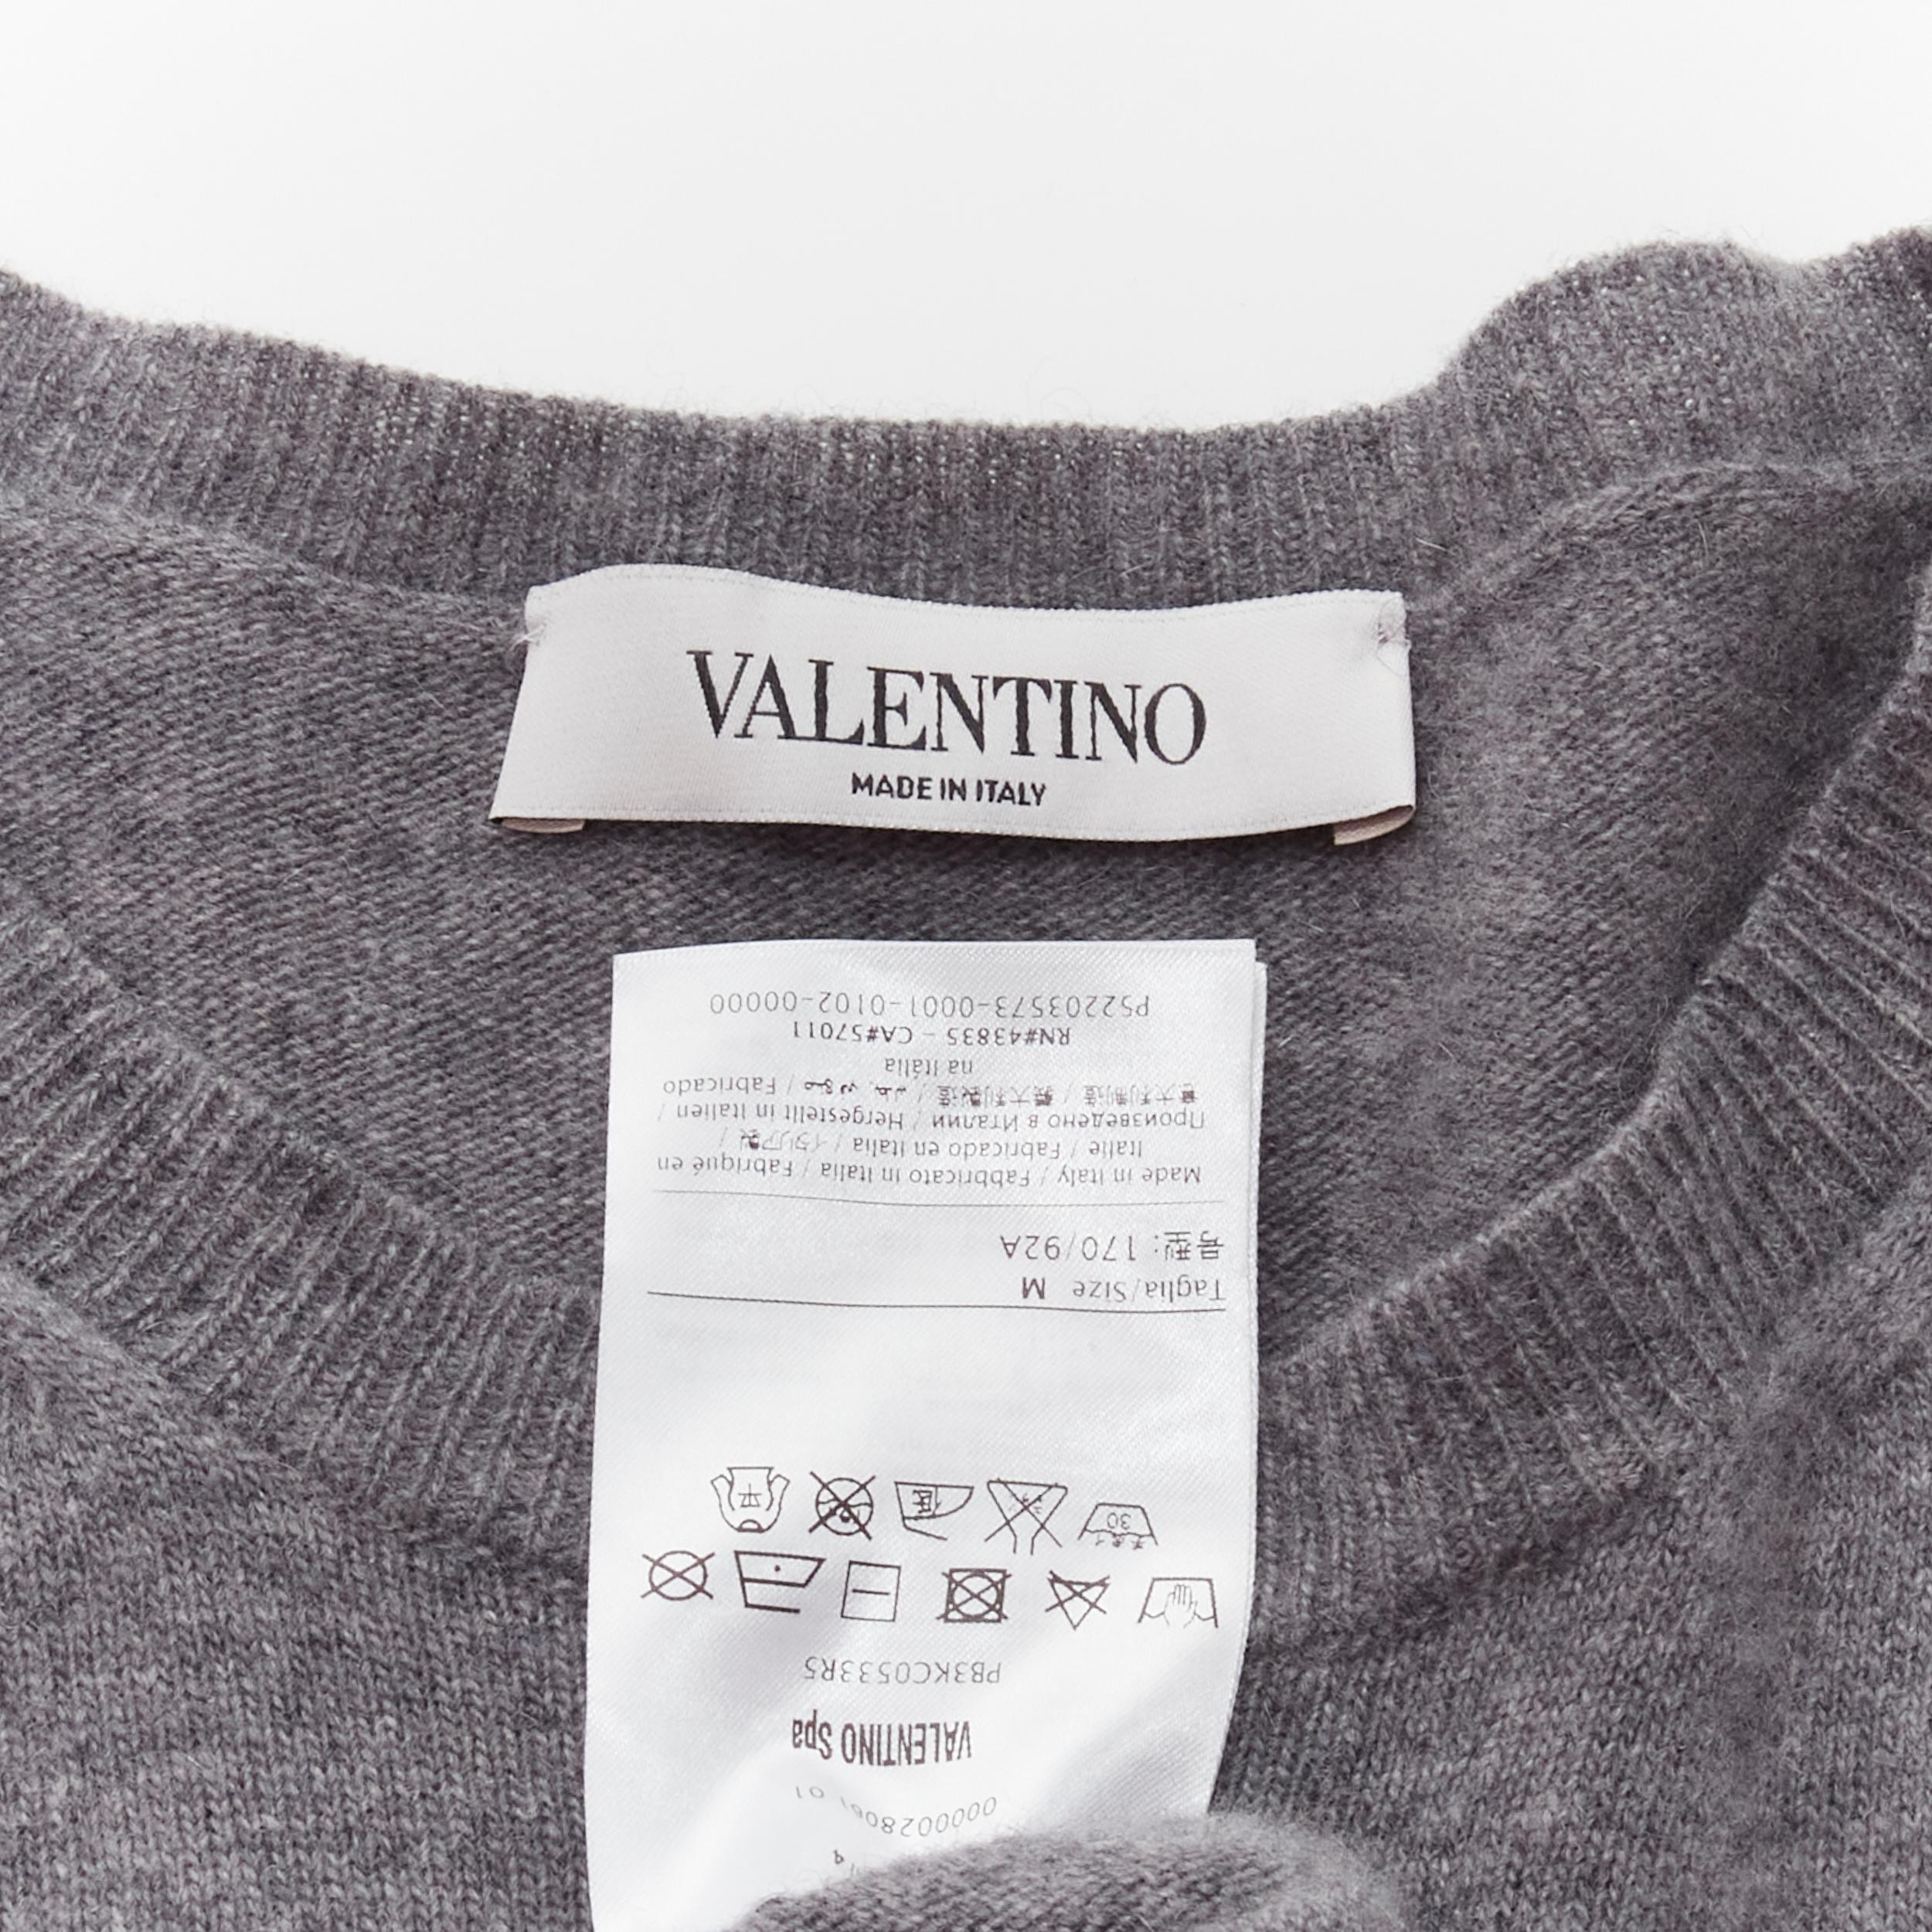 VALENTINO grey virgin wool cashmere pink cursive graphic logo sweater top M For Sale 3